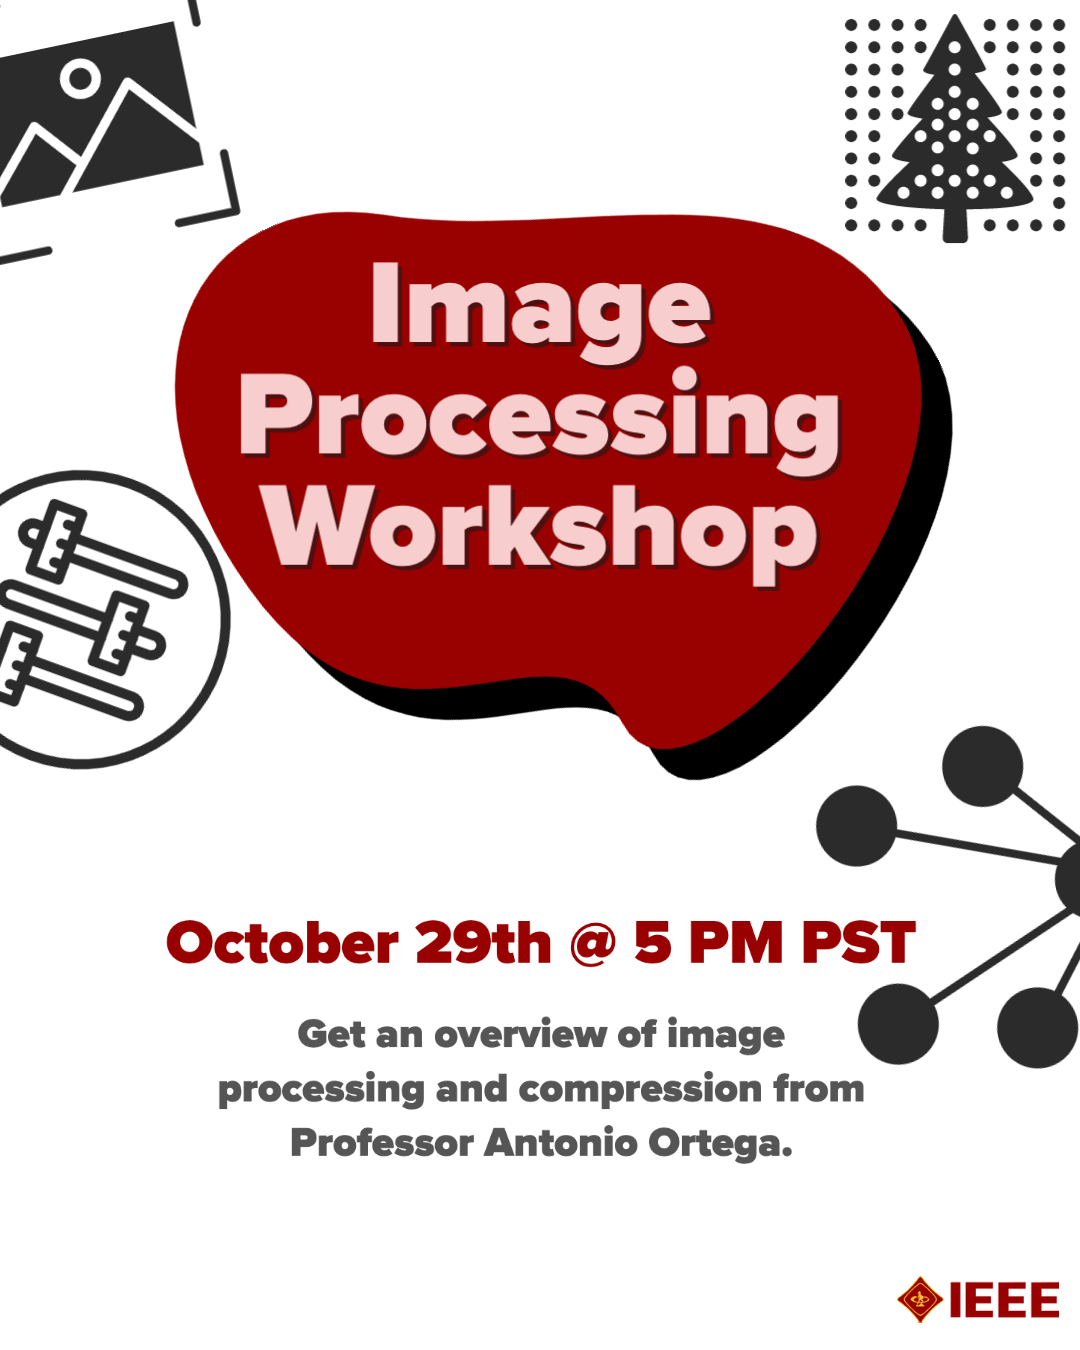 Featured image for “IEEE Image Processing Workshop”